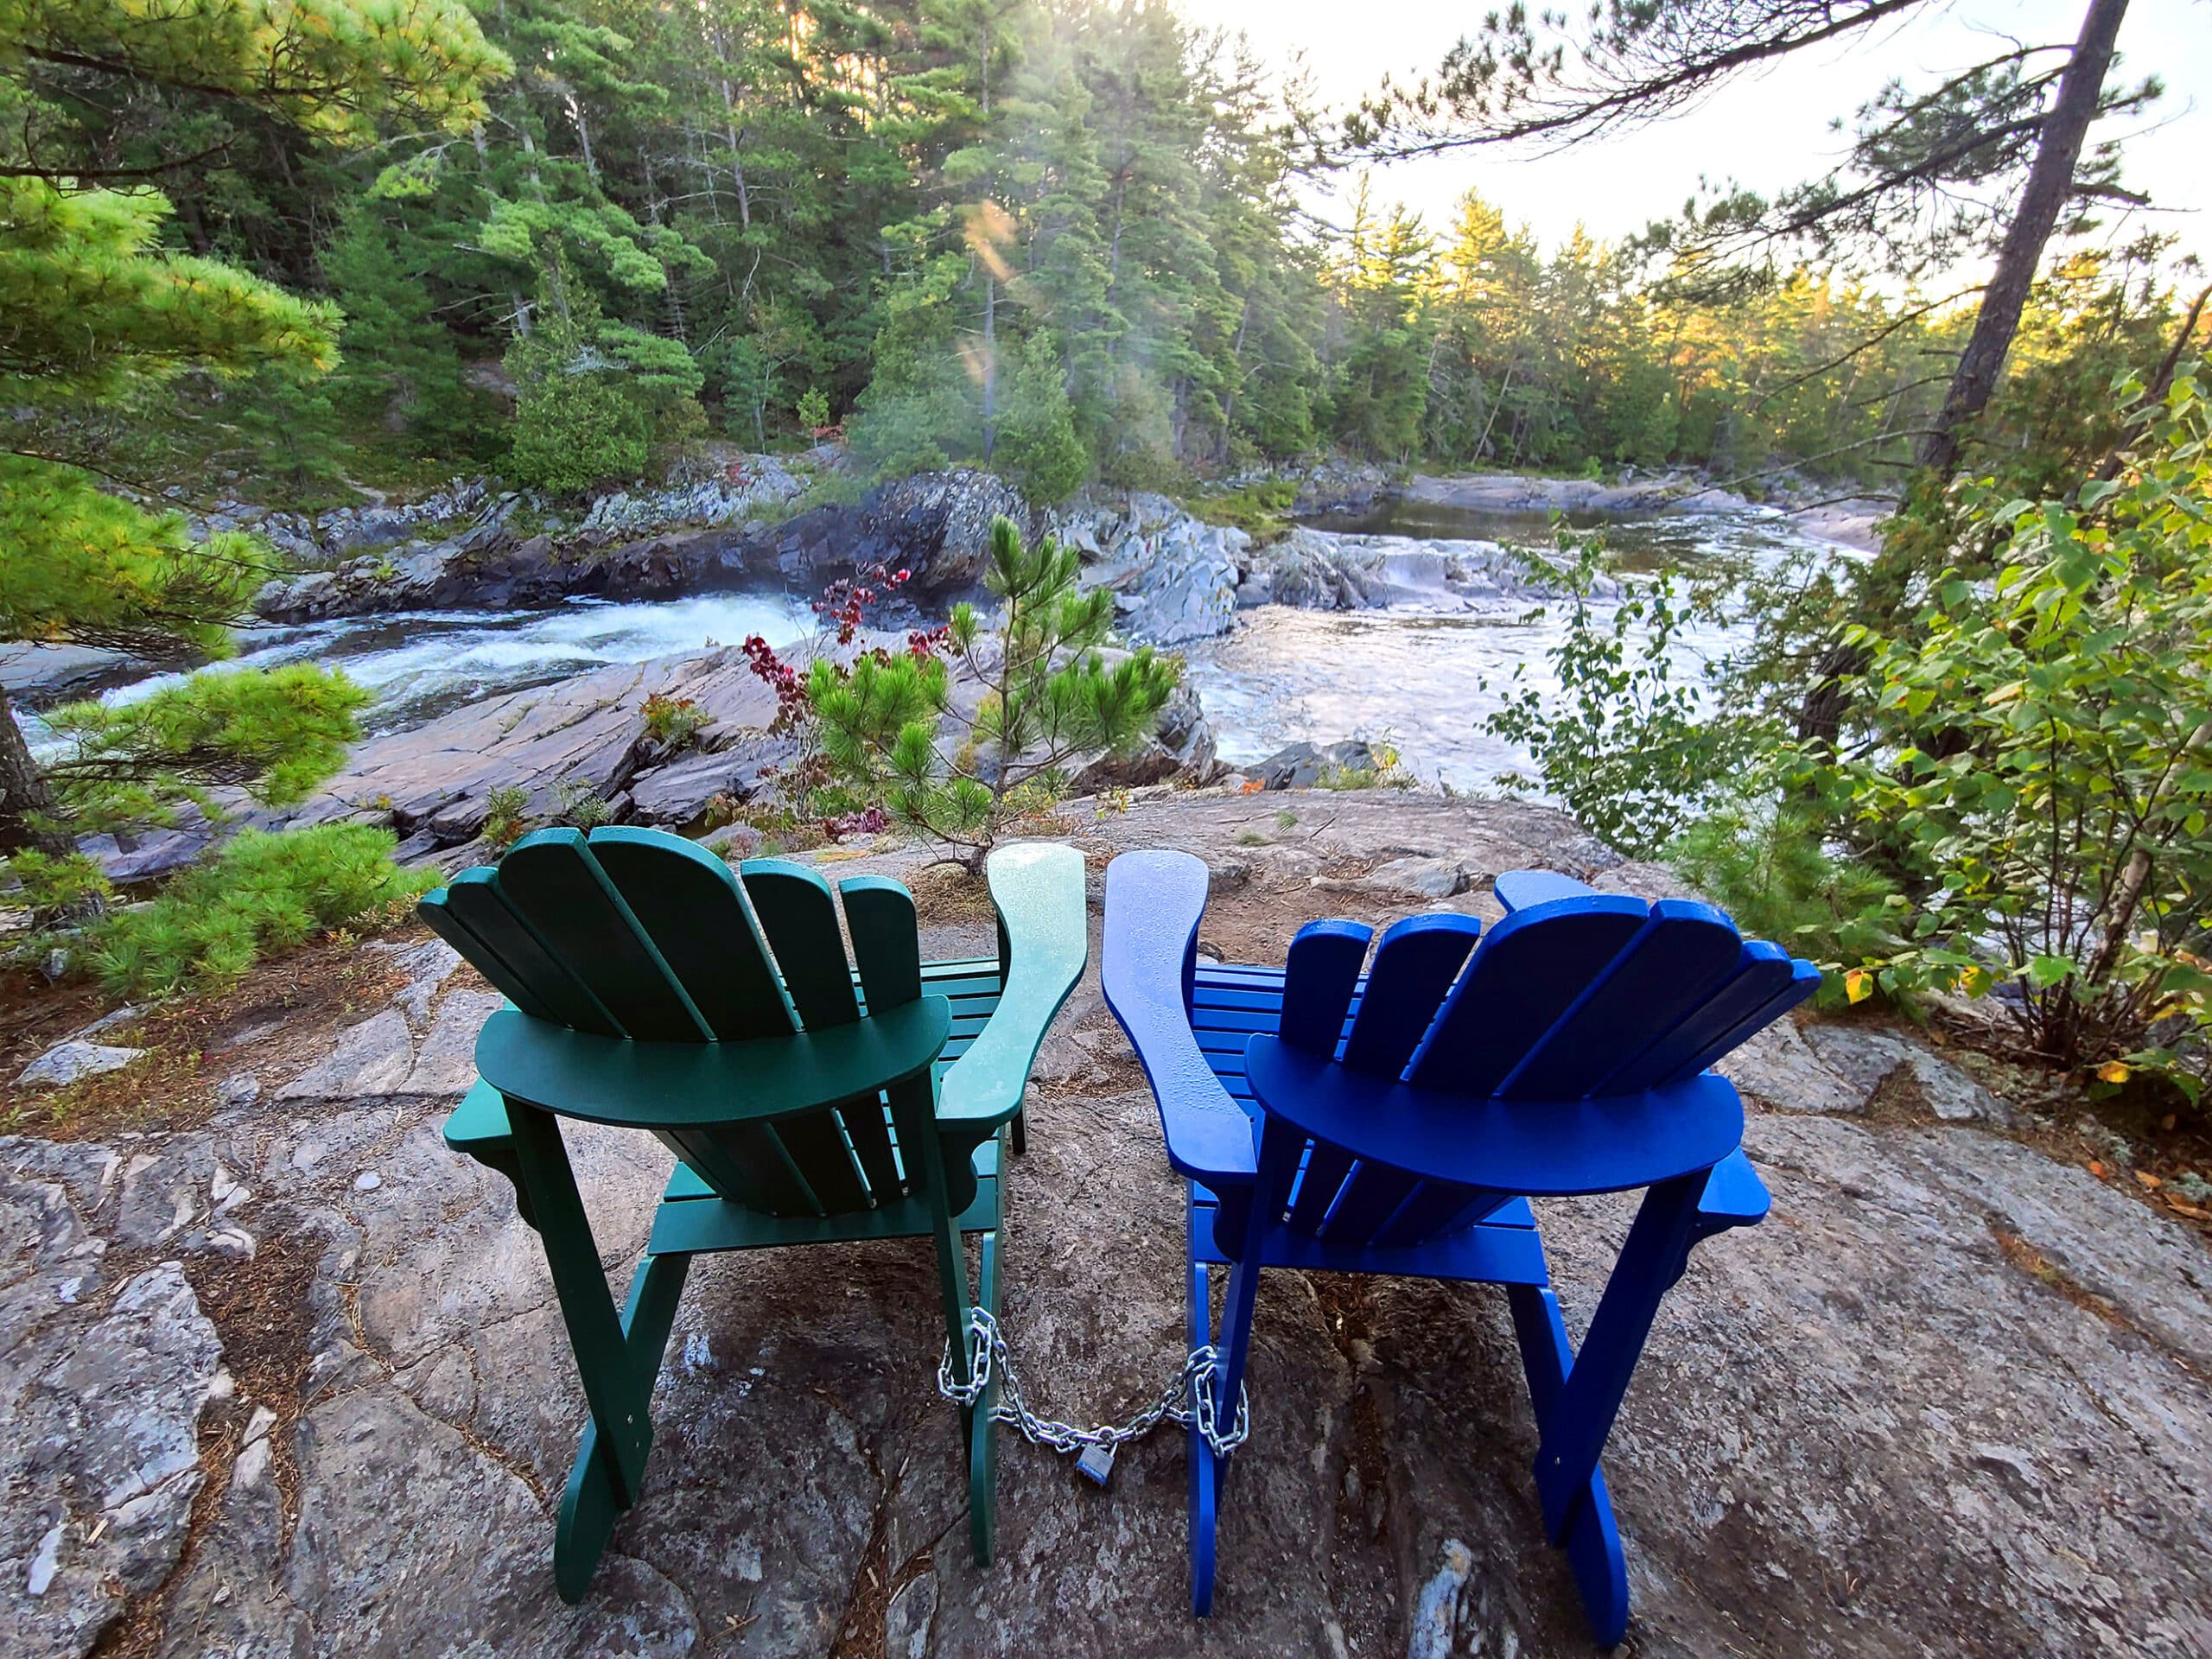 A green and a blue muskoka chair overlooking the rapids.